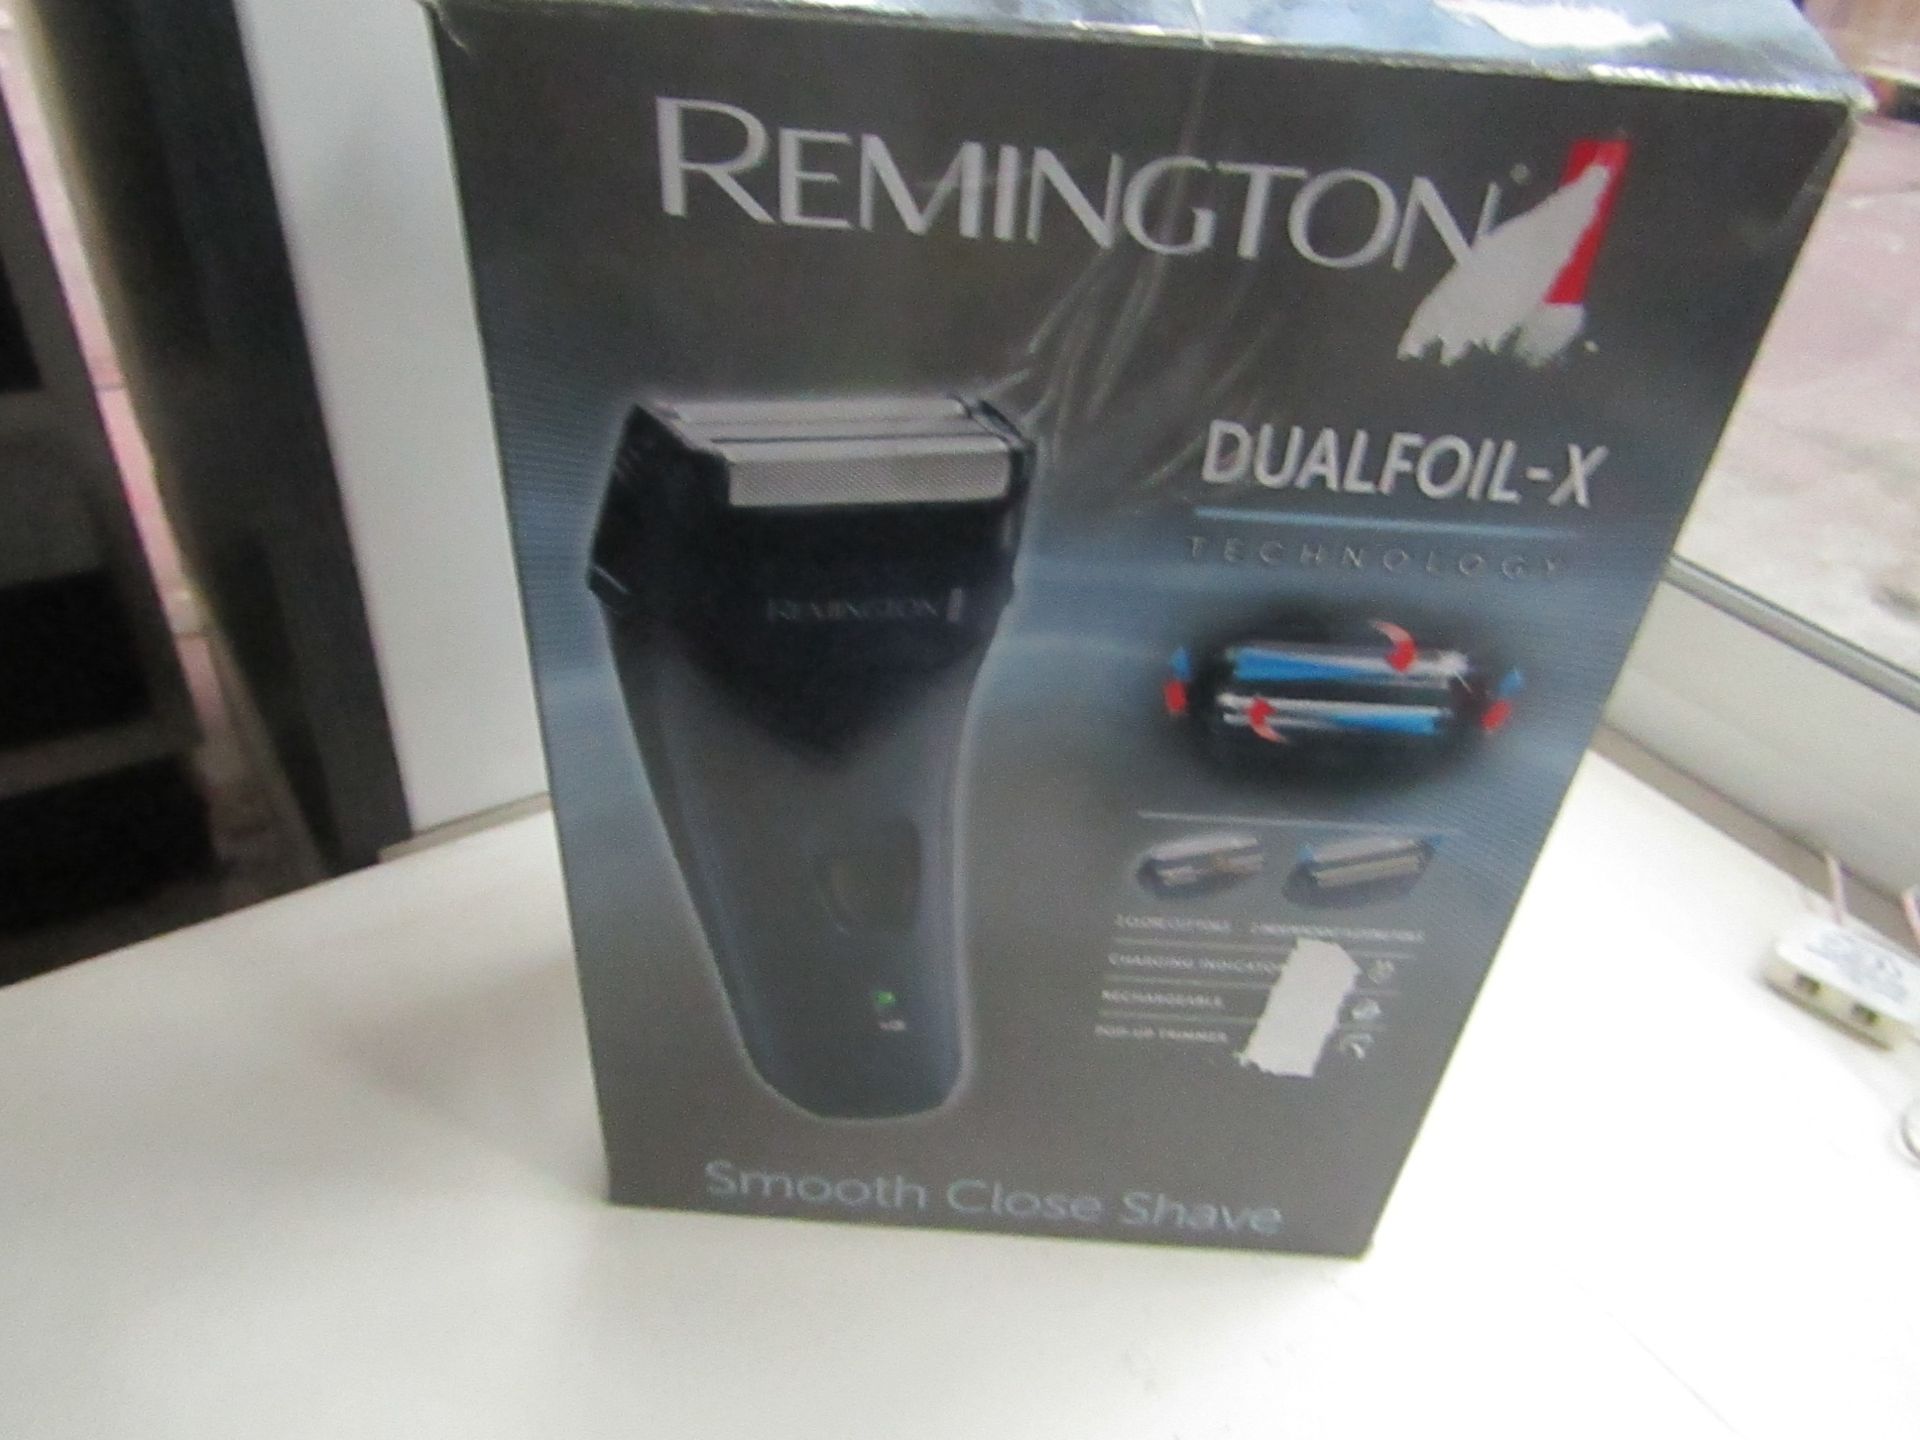 2x Remington Dual Foil-X beard trimmer, both tested working and boxed.